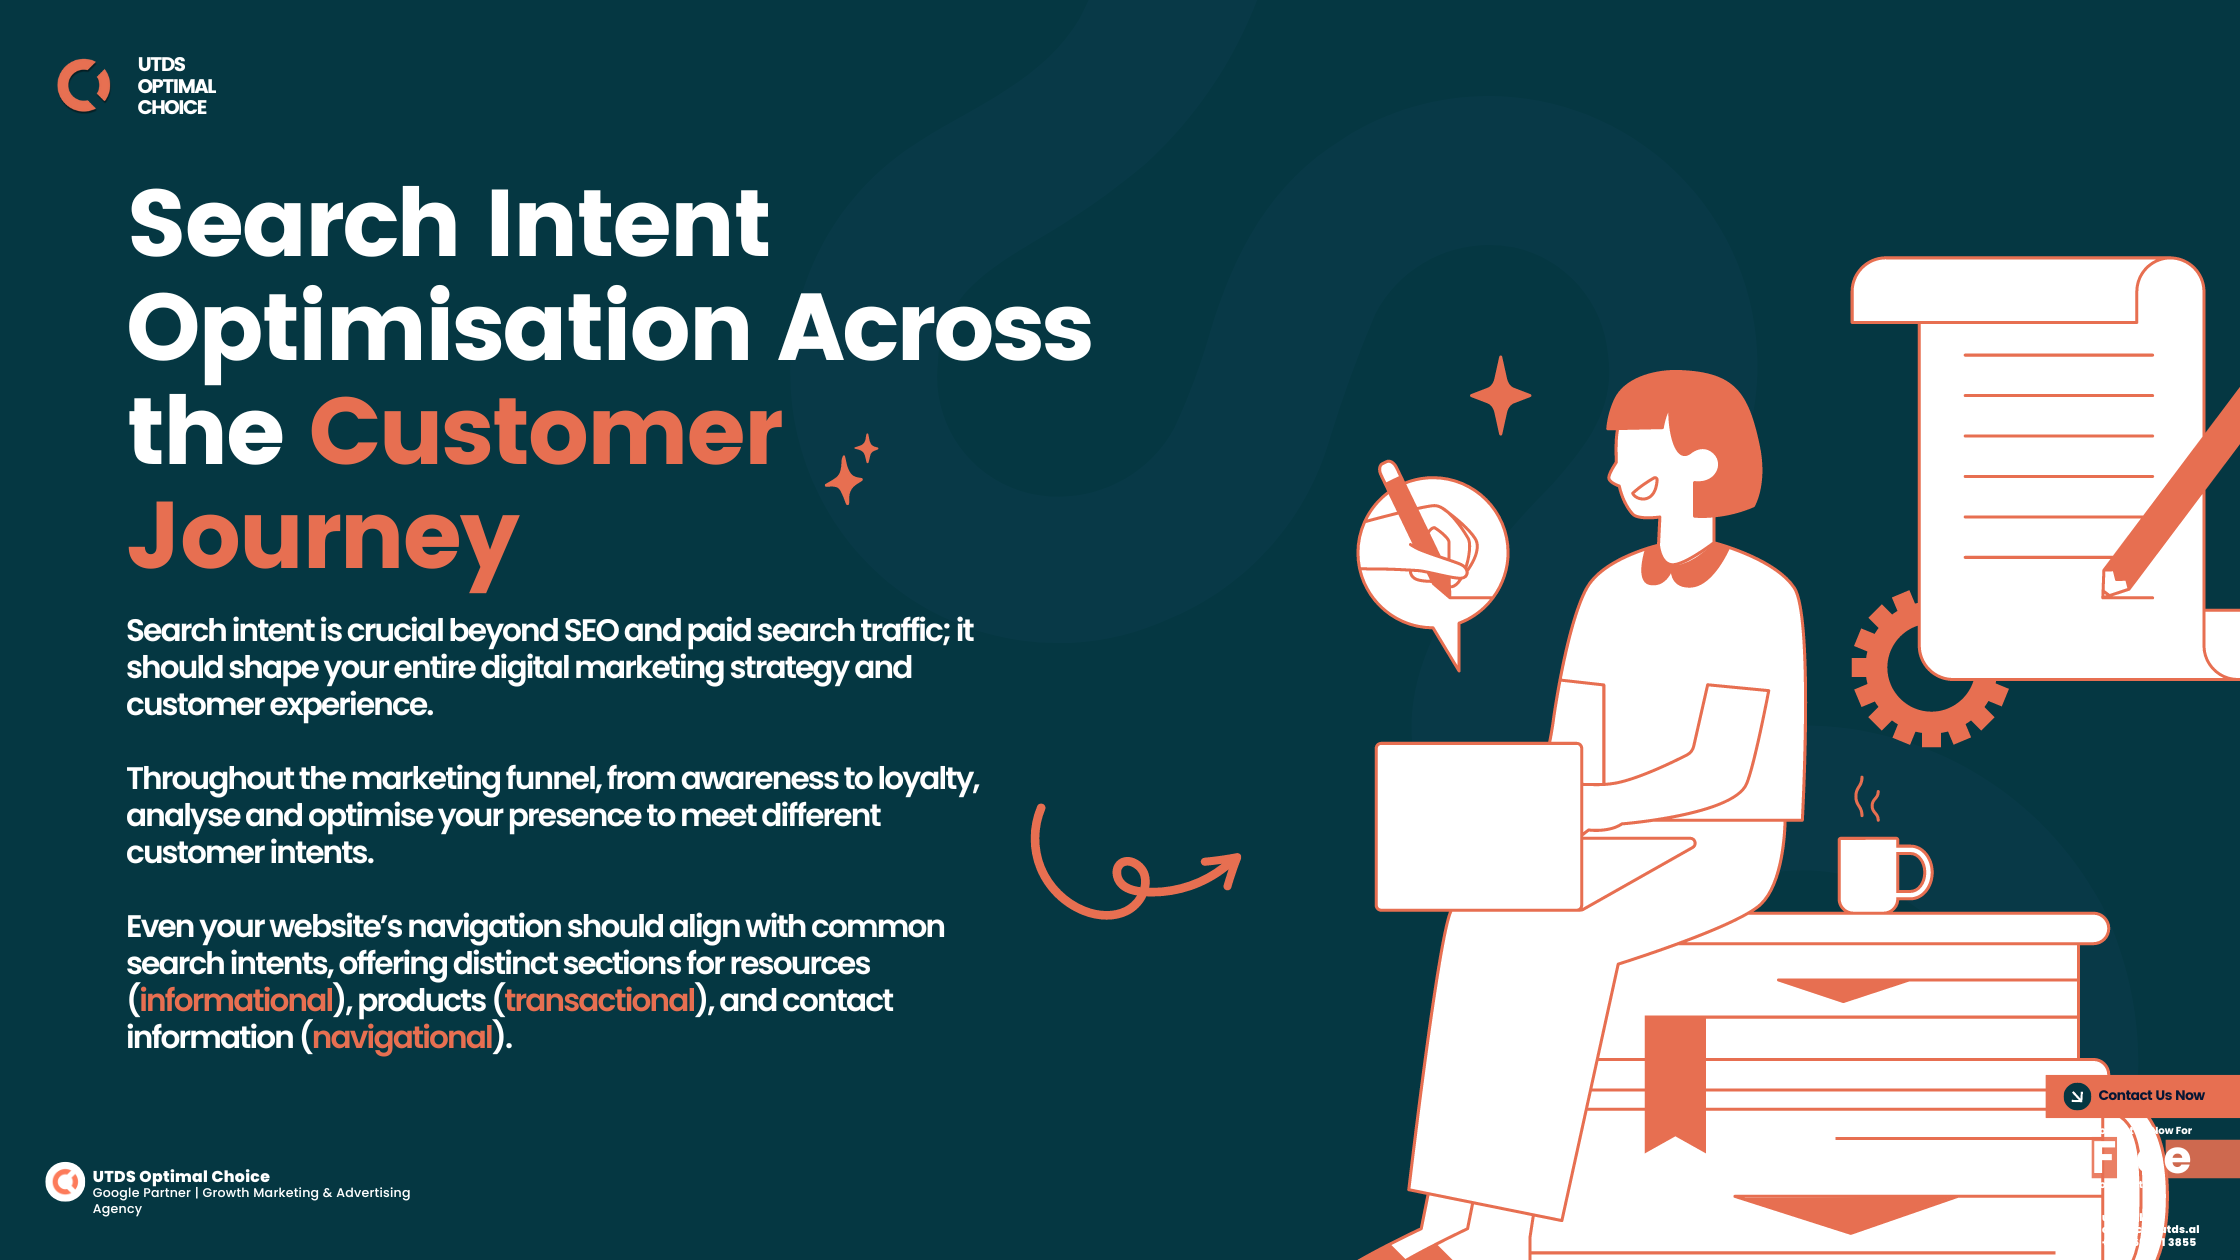 Search Intent Optimisation Across the Customer Journey